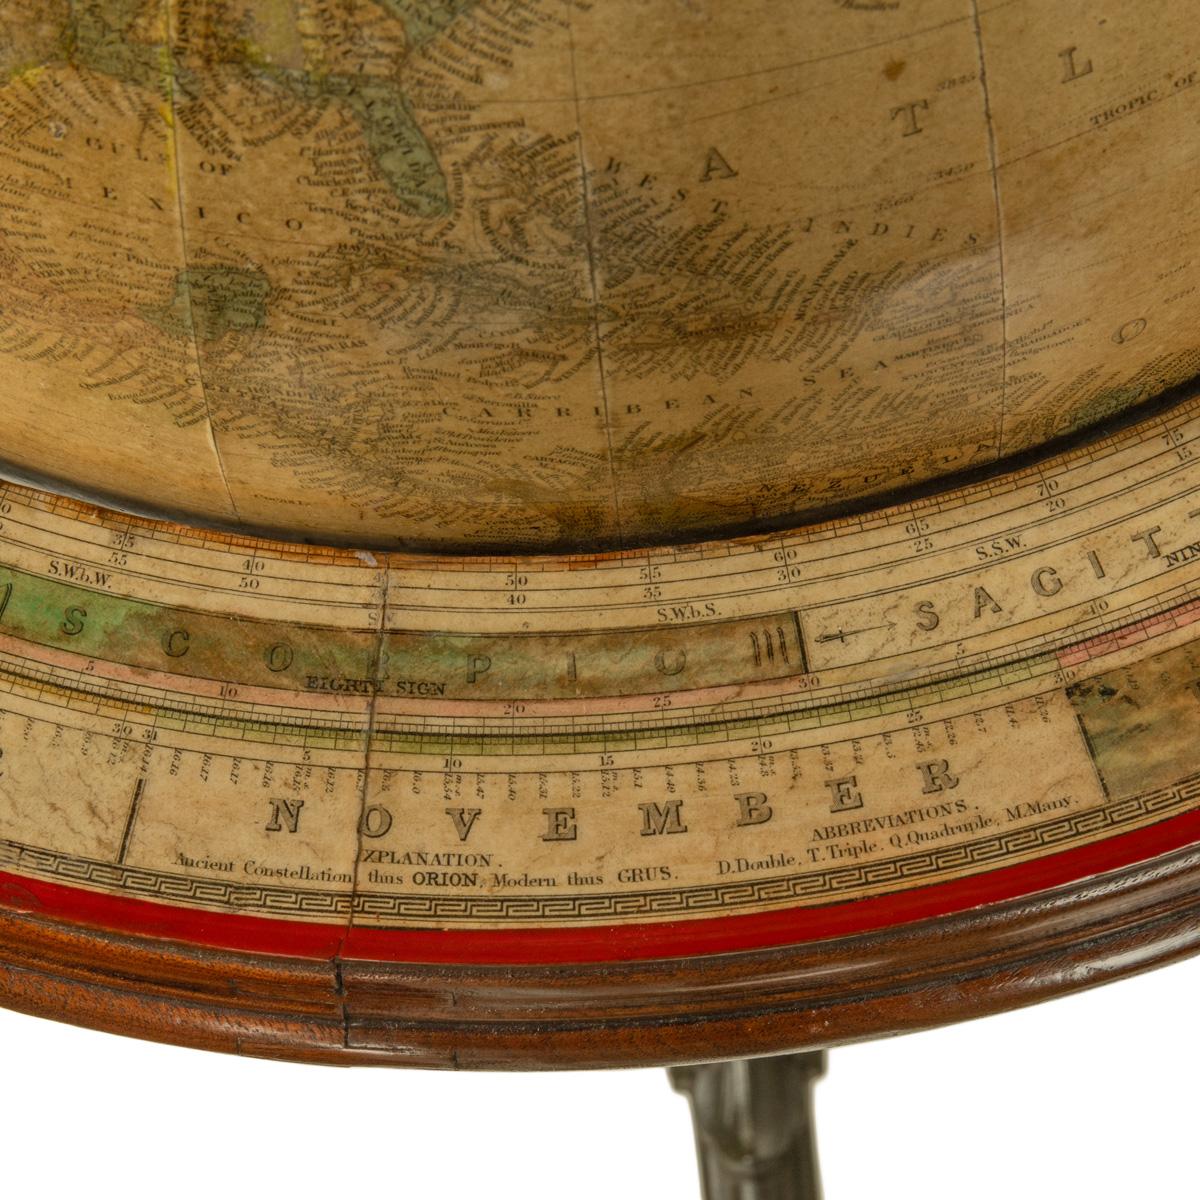 A 15-inch terrestrial floor globe by Nims & Co In Good Condition For Sale In Lymington, Hampshire